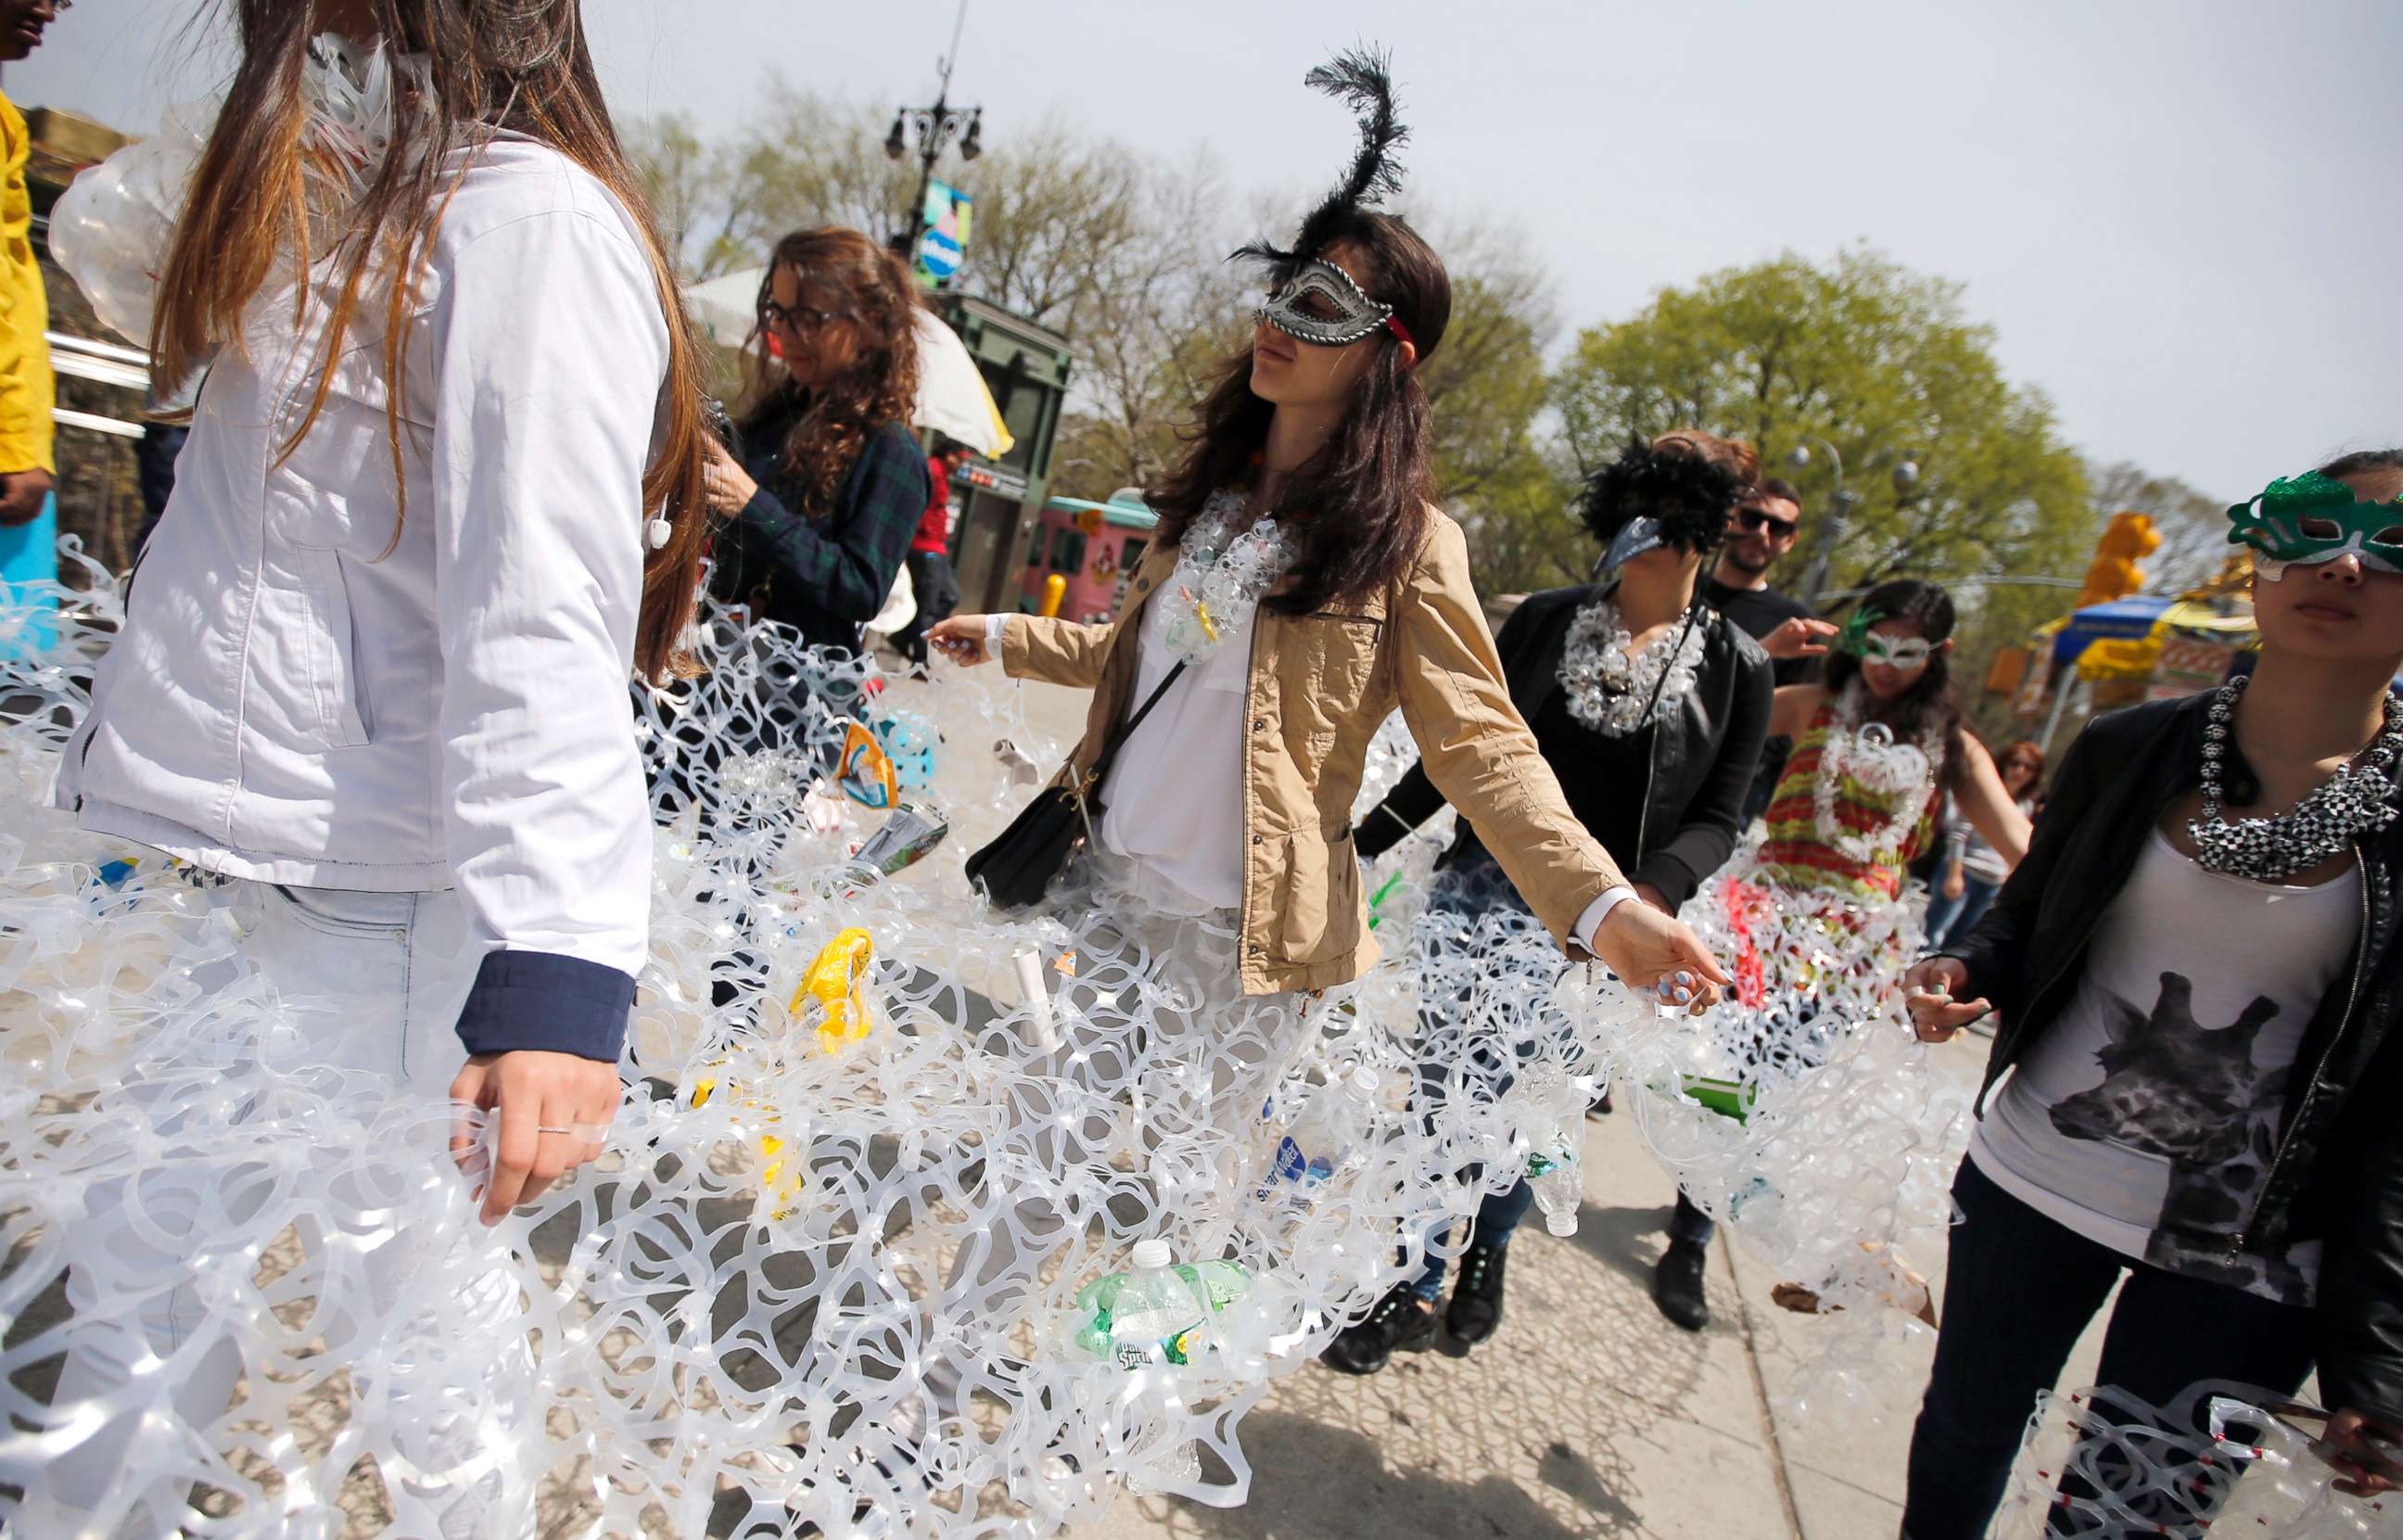 PHOTO: Demonstrators march together in plastic six pack rings during a demonstration to mark Earth Day in Manhattan, April 22, 2014, in this file photo in New York City.